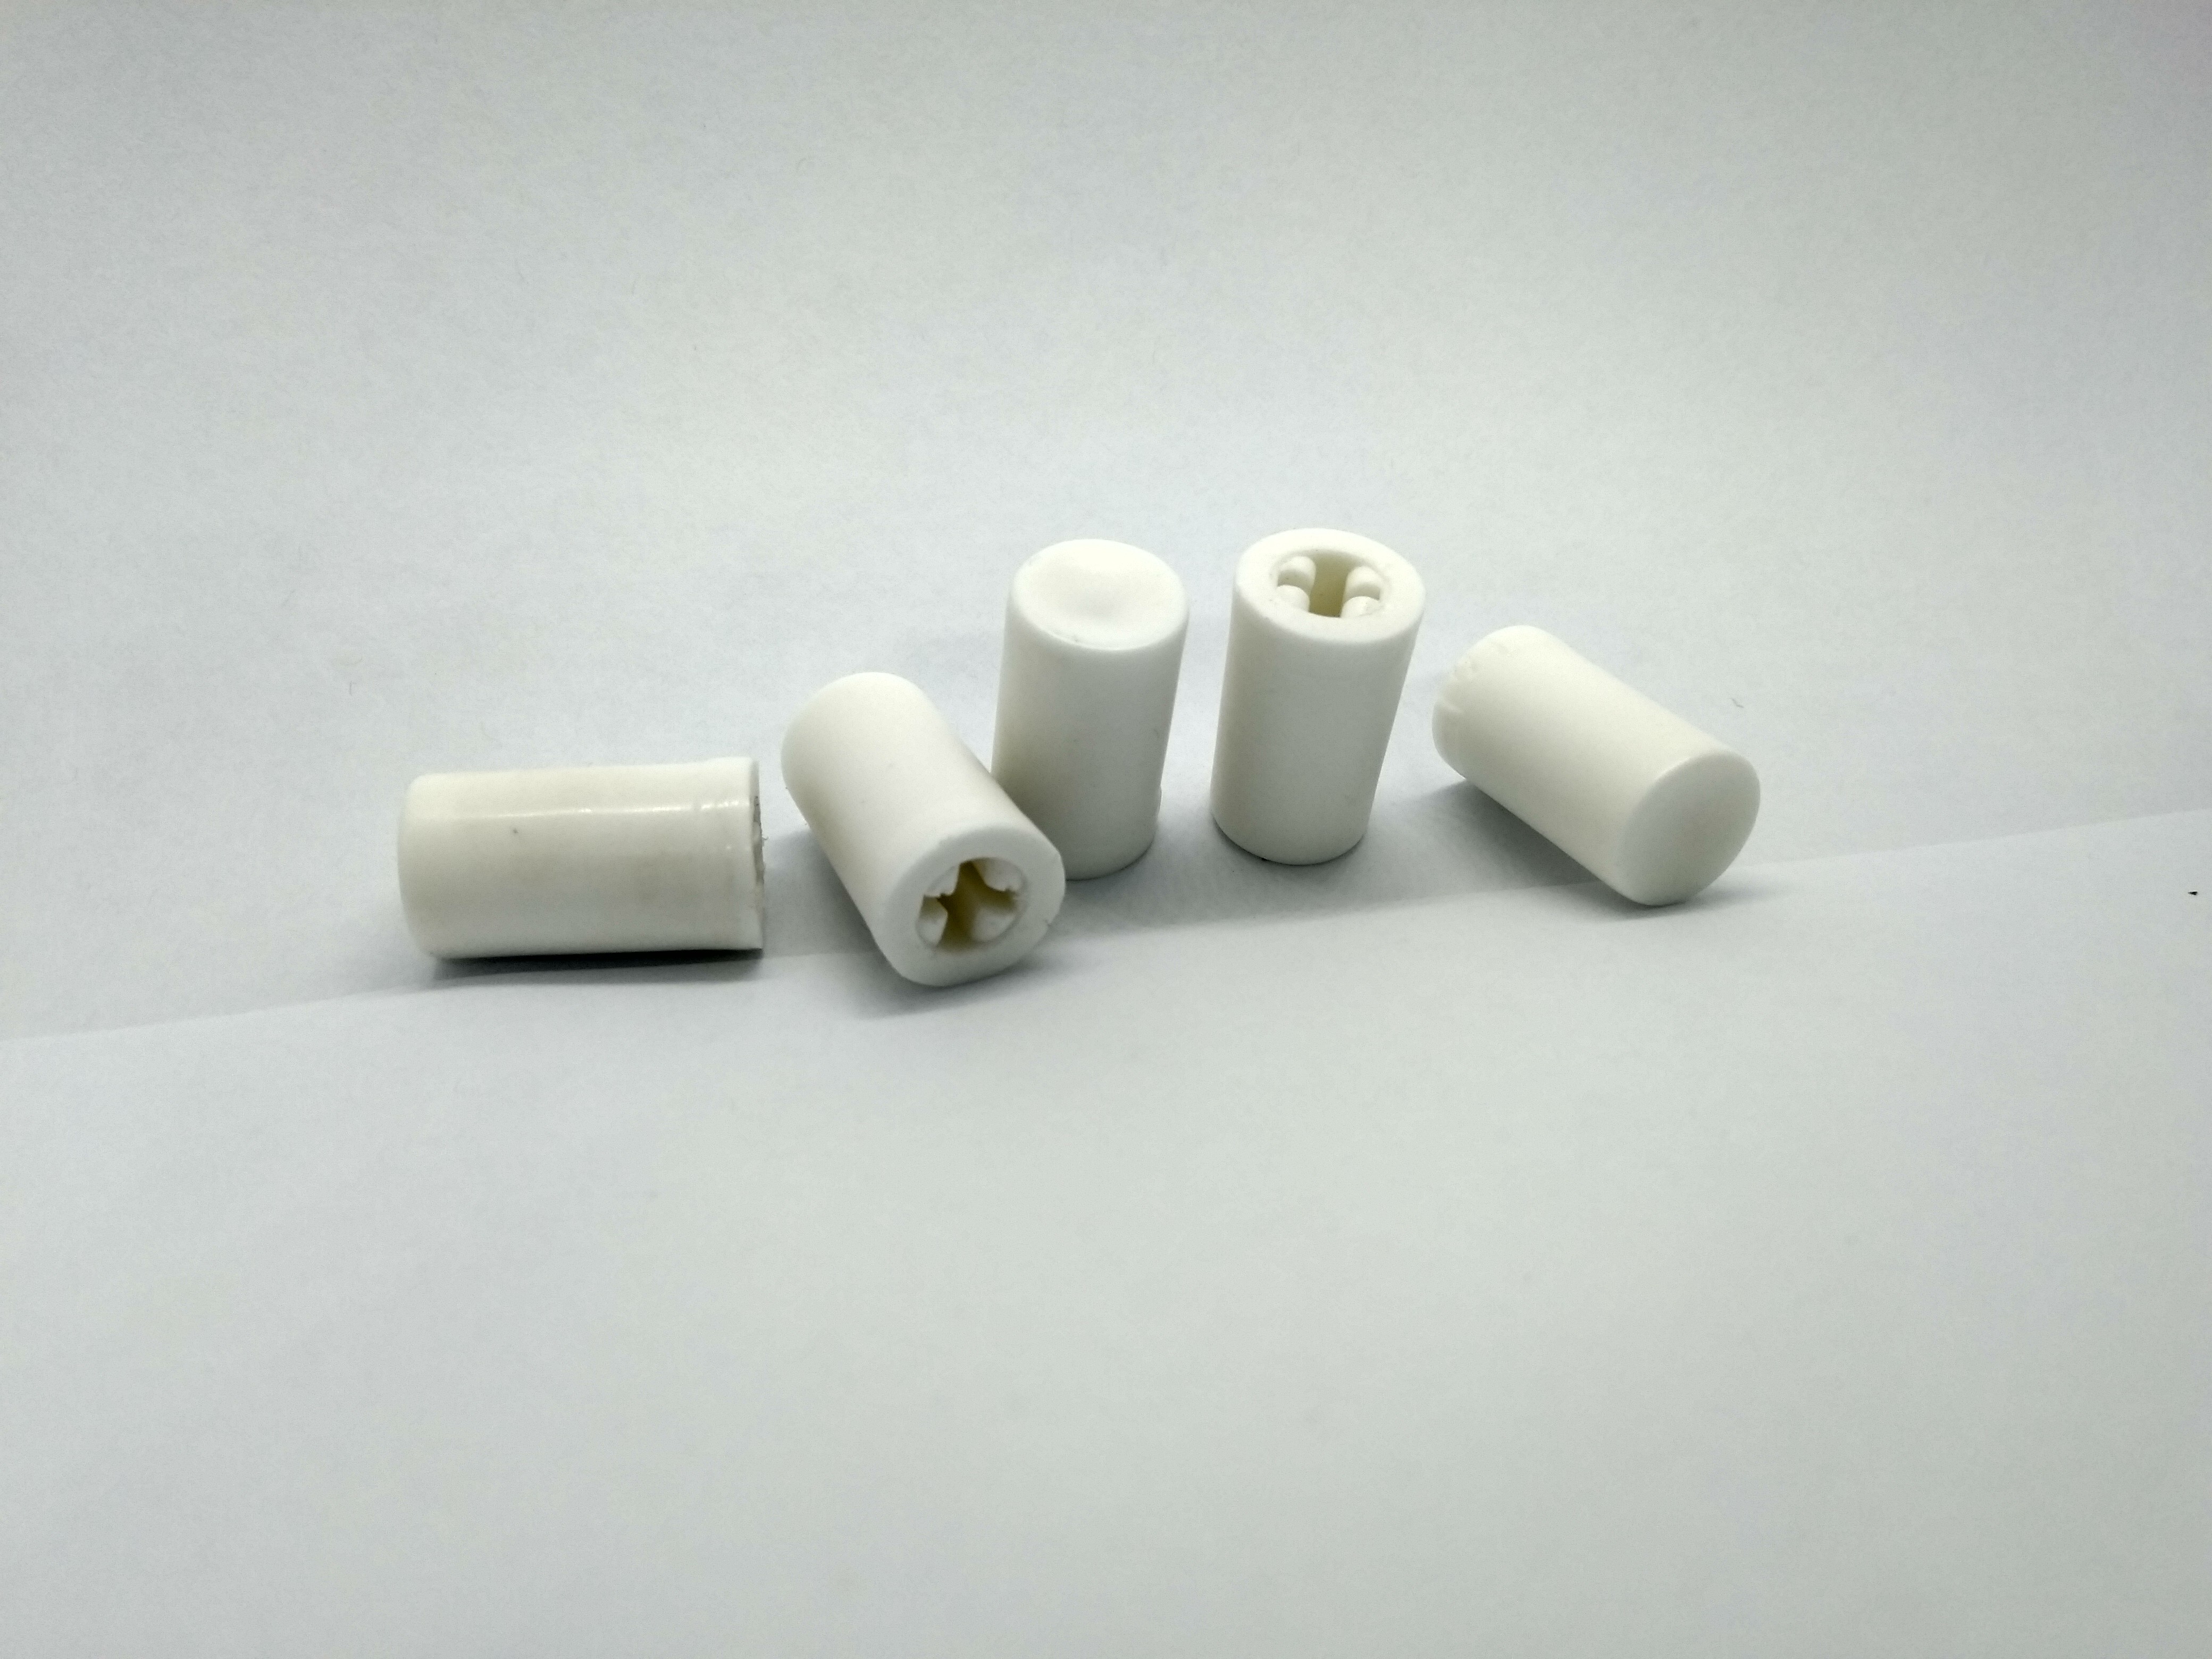 Reproduction Push Button Radio Knobs : White : Set of 5 : Suit SV1 / RV1